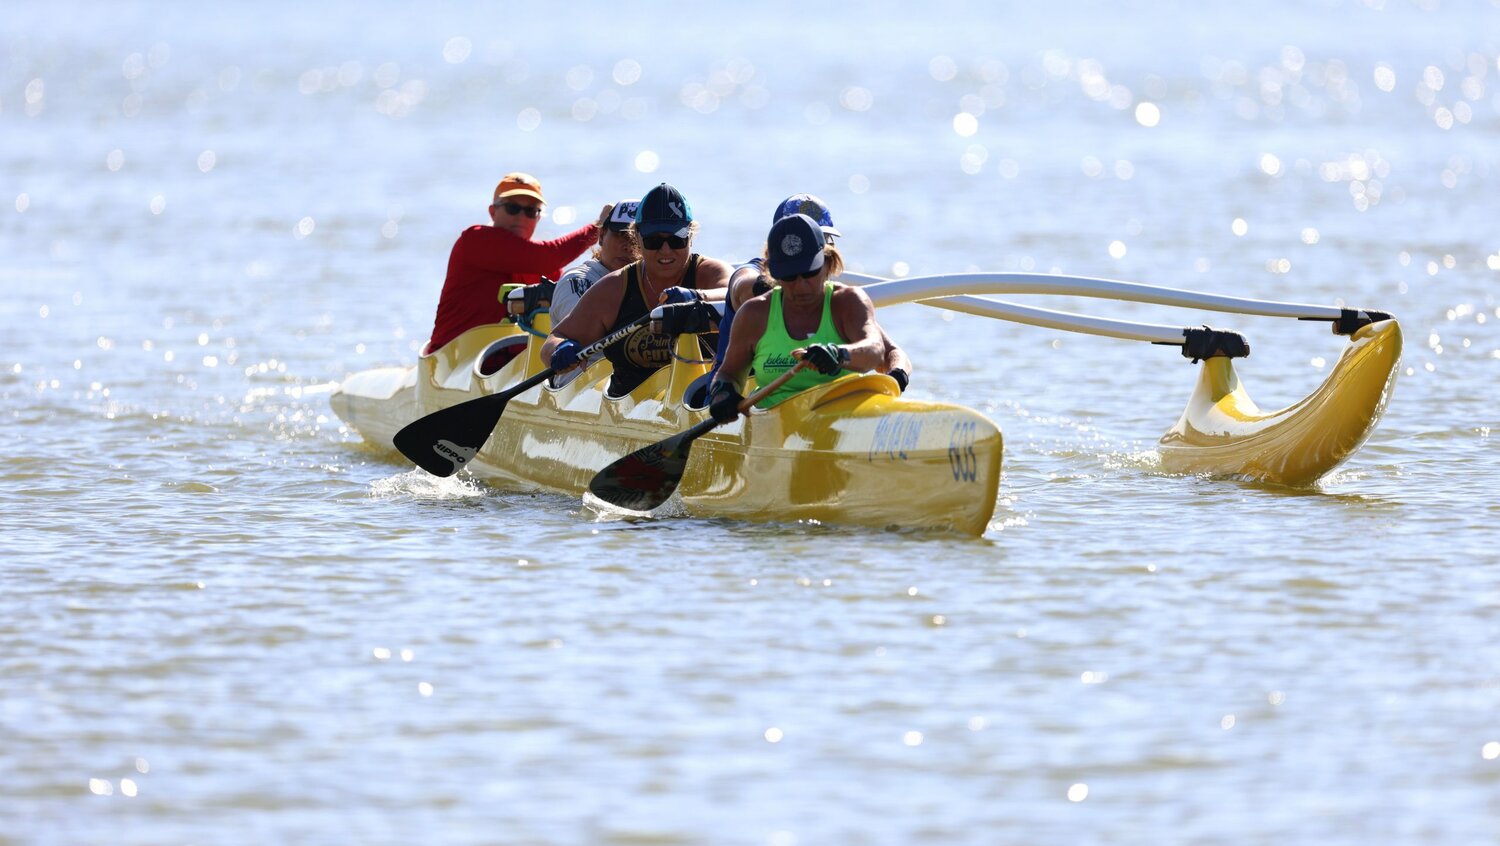 From front, Hedy Downing, Laura Tallman, Alison Lee, Alicia Lin Kee and Margaret Coulombe, practice paddling at Tempe Town Lake on Oct. 21, 2023. The group, including Na Leo ’O Ke Kai and Team Arizona members, prepares for an upcoming race in Parker. (Photo by Kevinjonah Paguio/Cronkite News)